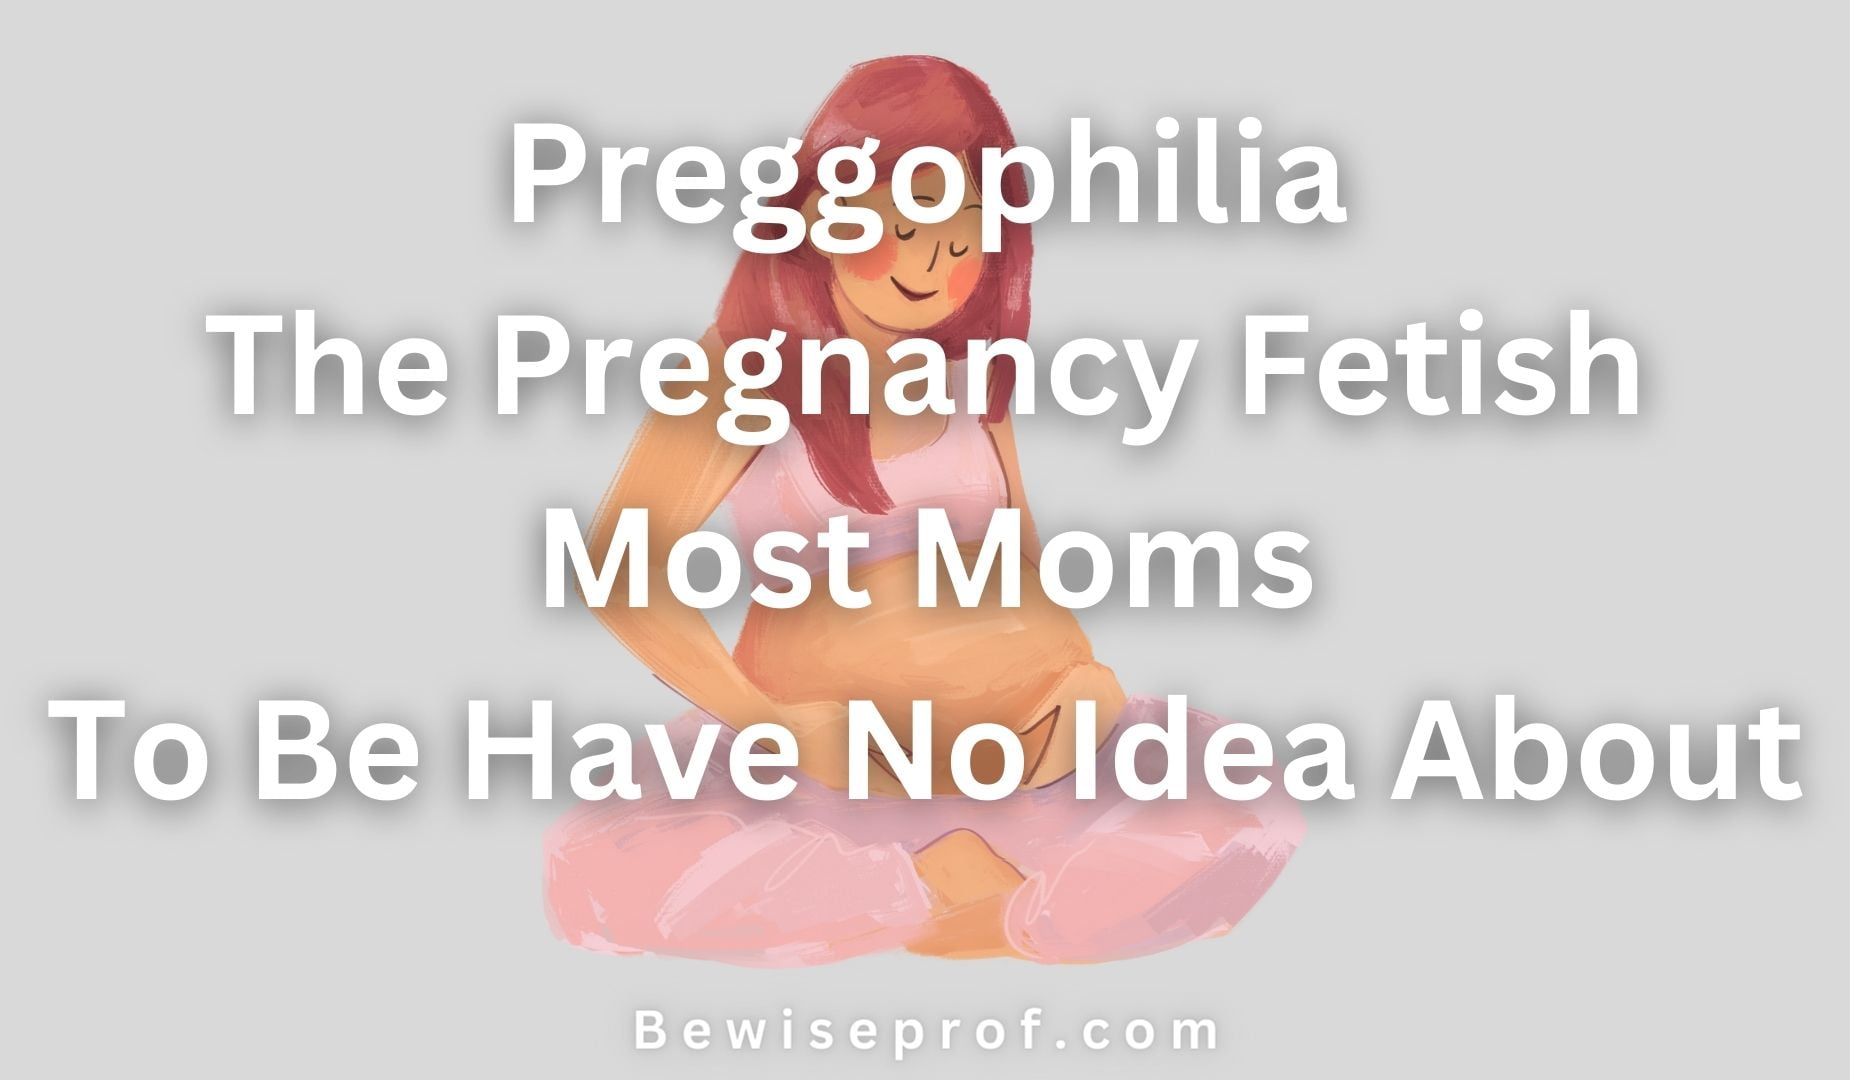 Preggophilia | The Pregnancy Fetish Most Moms To Be Have No Idea About